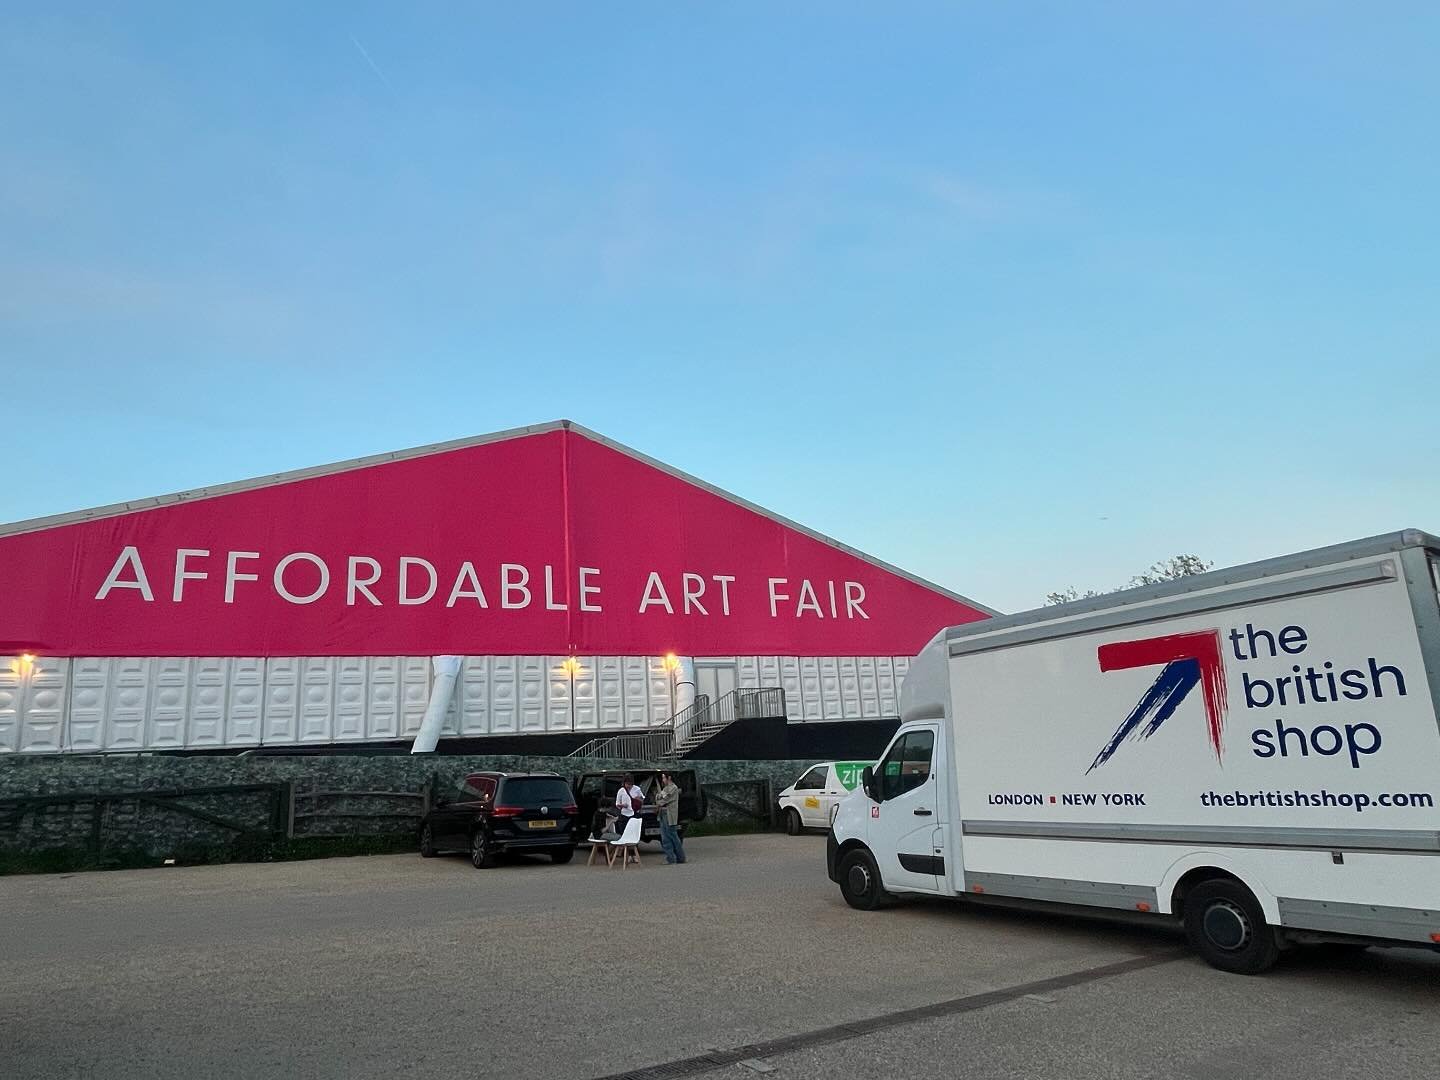 And that&rsquo;s a wrap! Very grateful to everyone involved in making @affordableartfairuk #Hampstead happen - the great #aaf team, the fab guys @the_british_shop1 doing the art wrapping and transport of our art, the visitors and all who bought art f